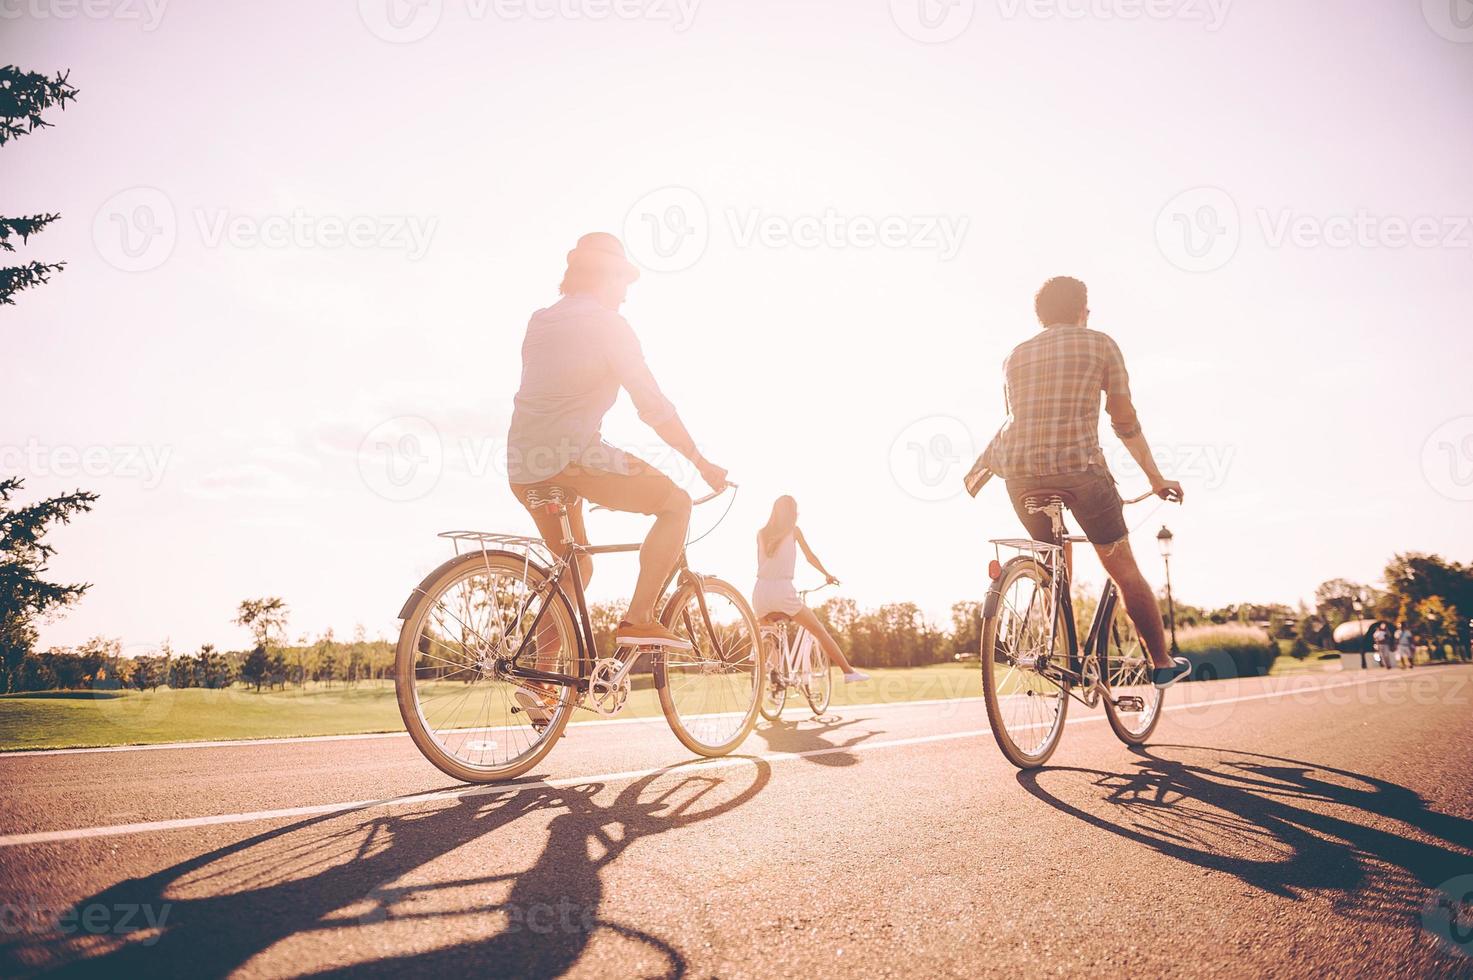 Enjoying carefree time together. Rear view of young cheerful people riding bicycles along a road together photo